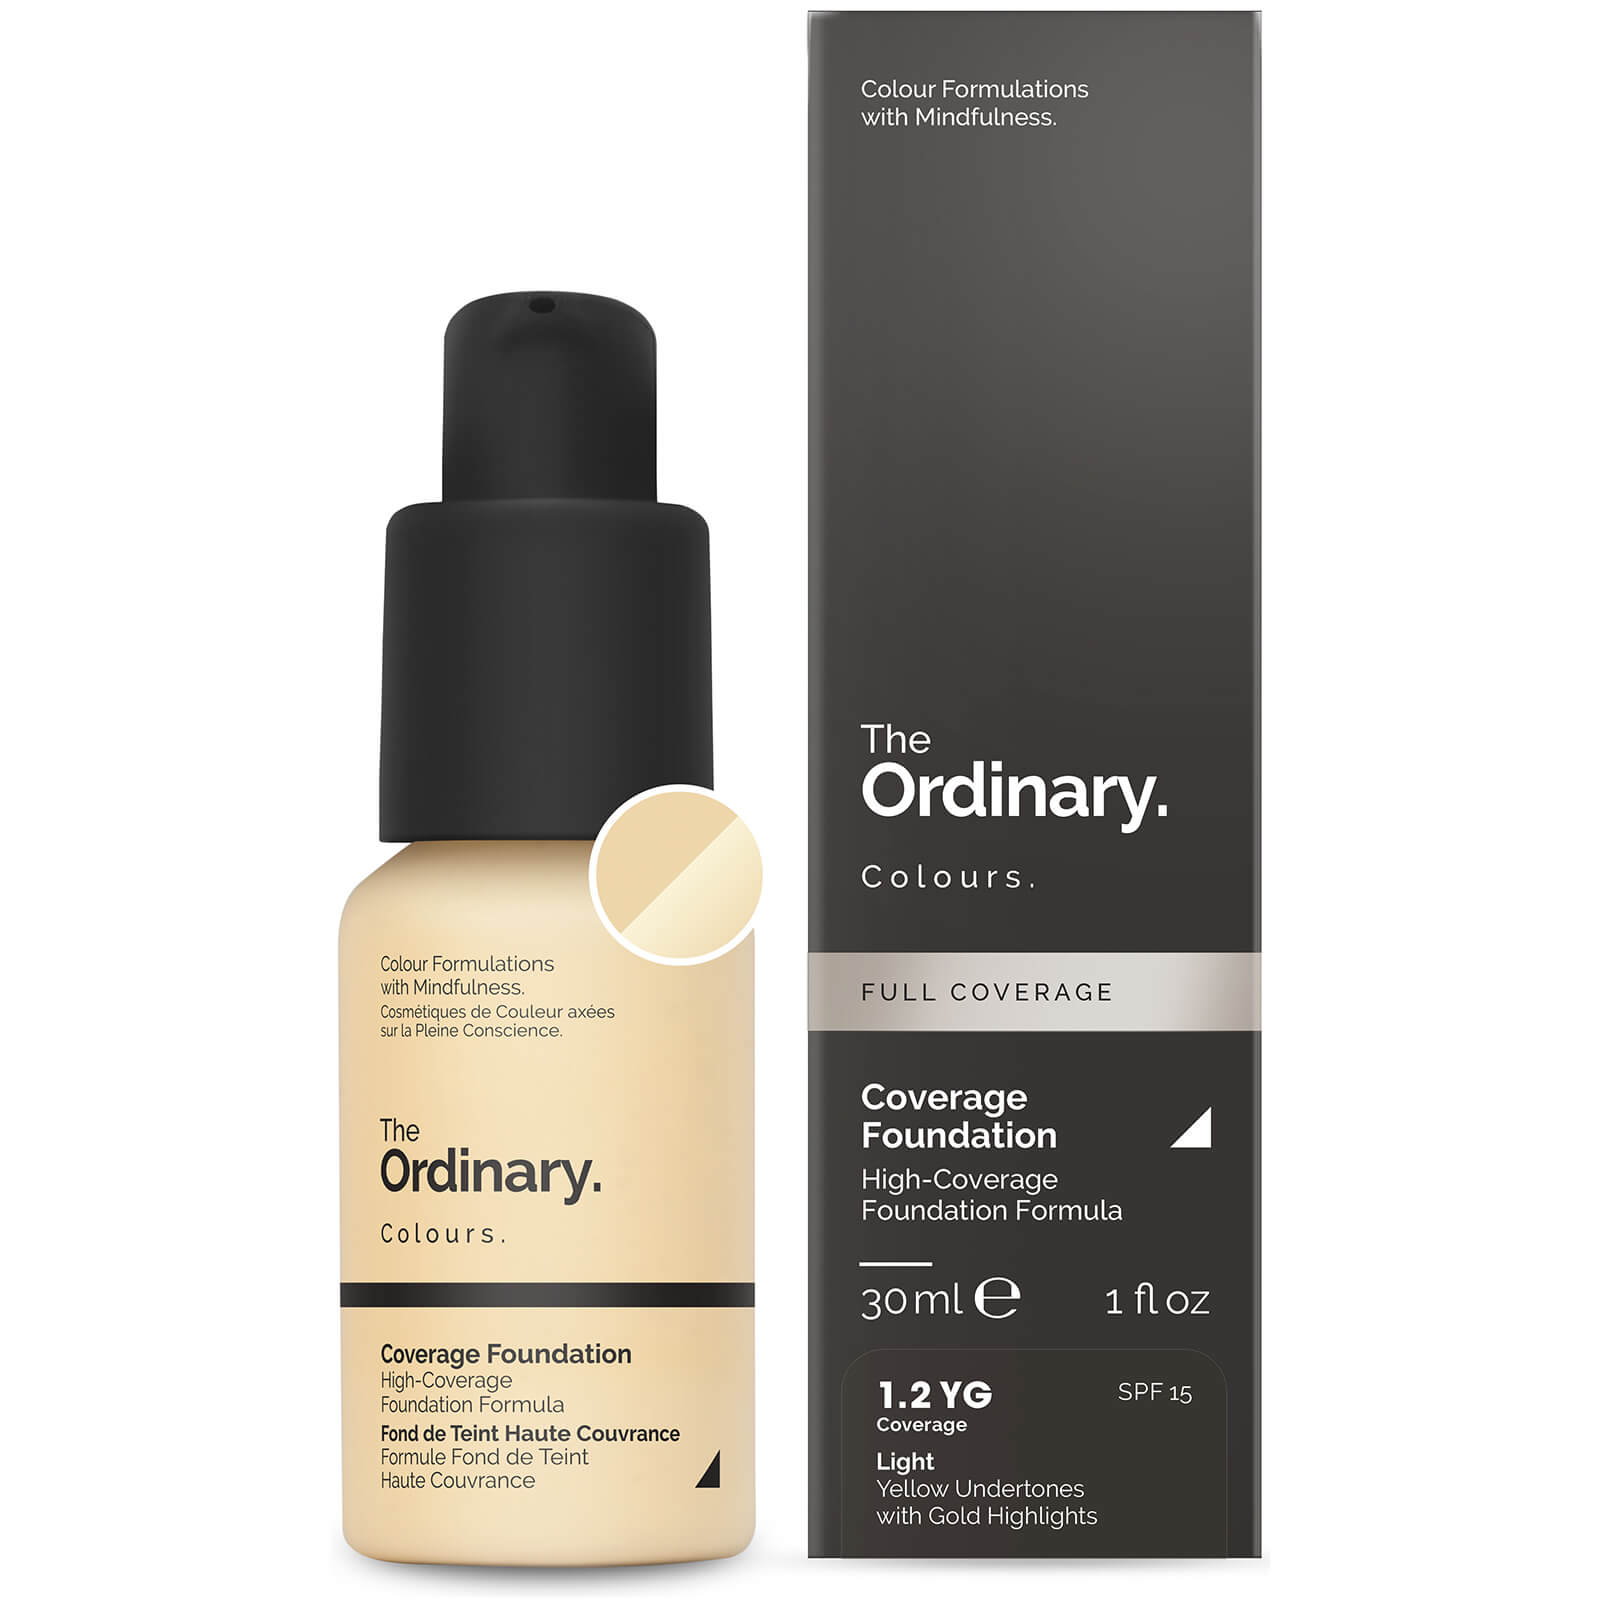 The Ordinary Coverage Foundation with SPF 15 by The Ordinary Colours 30ml (Various Shades) - 1.2YG